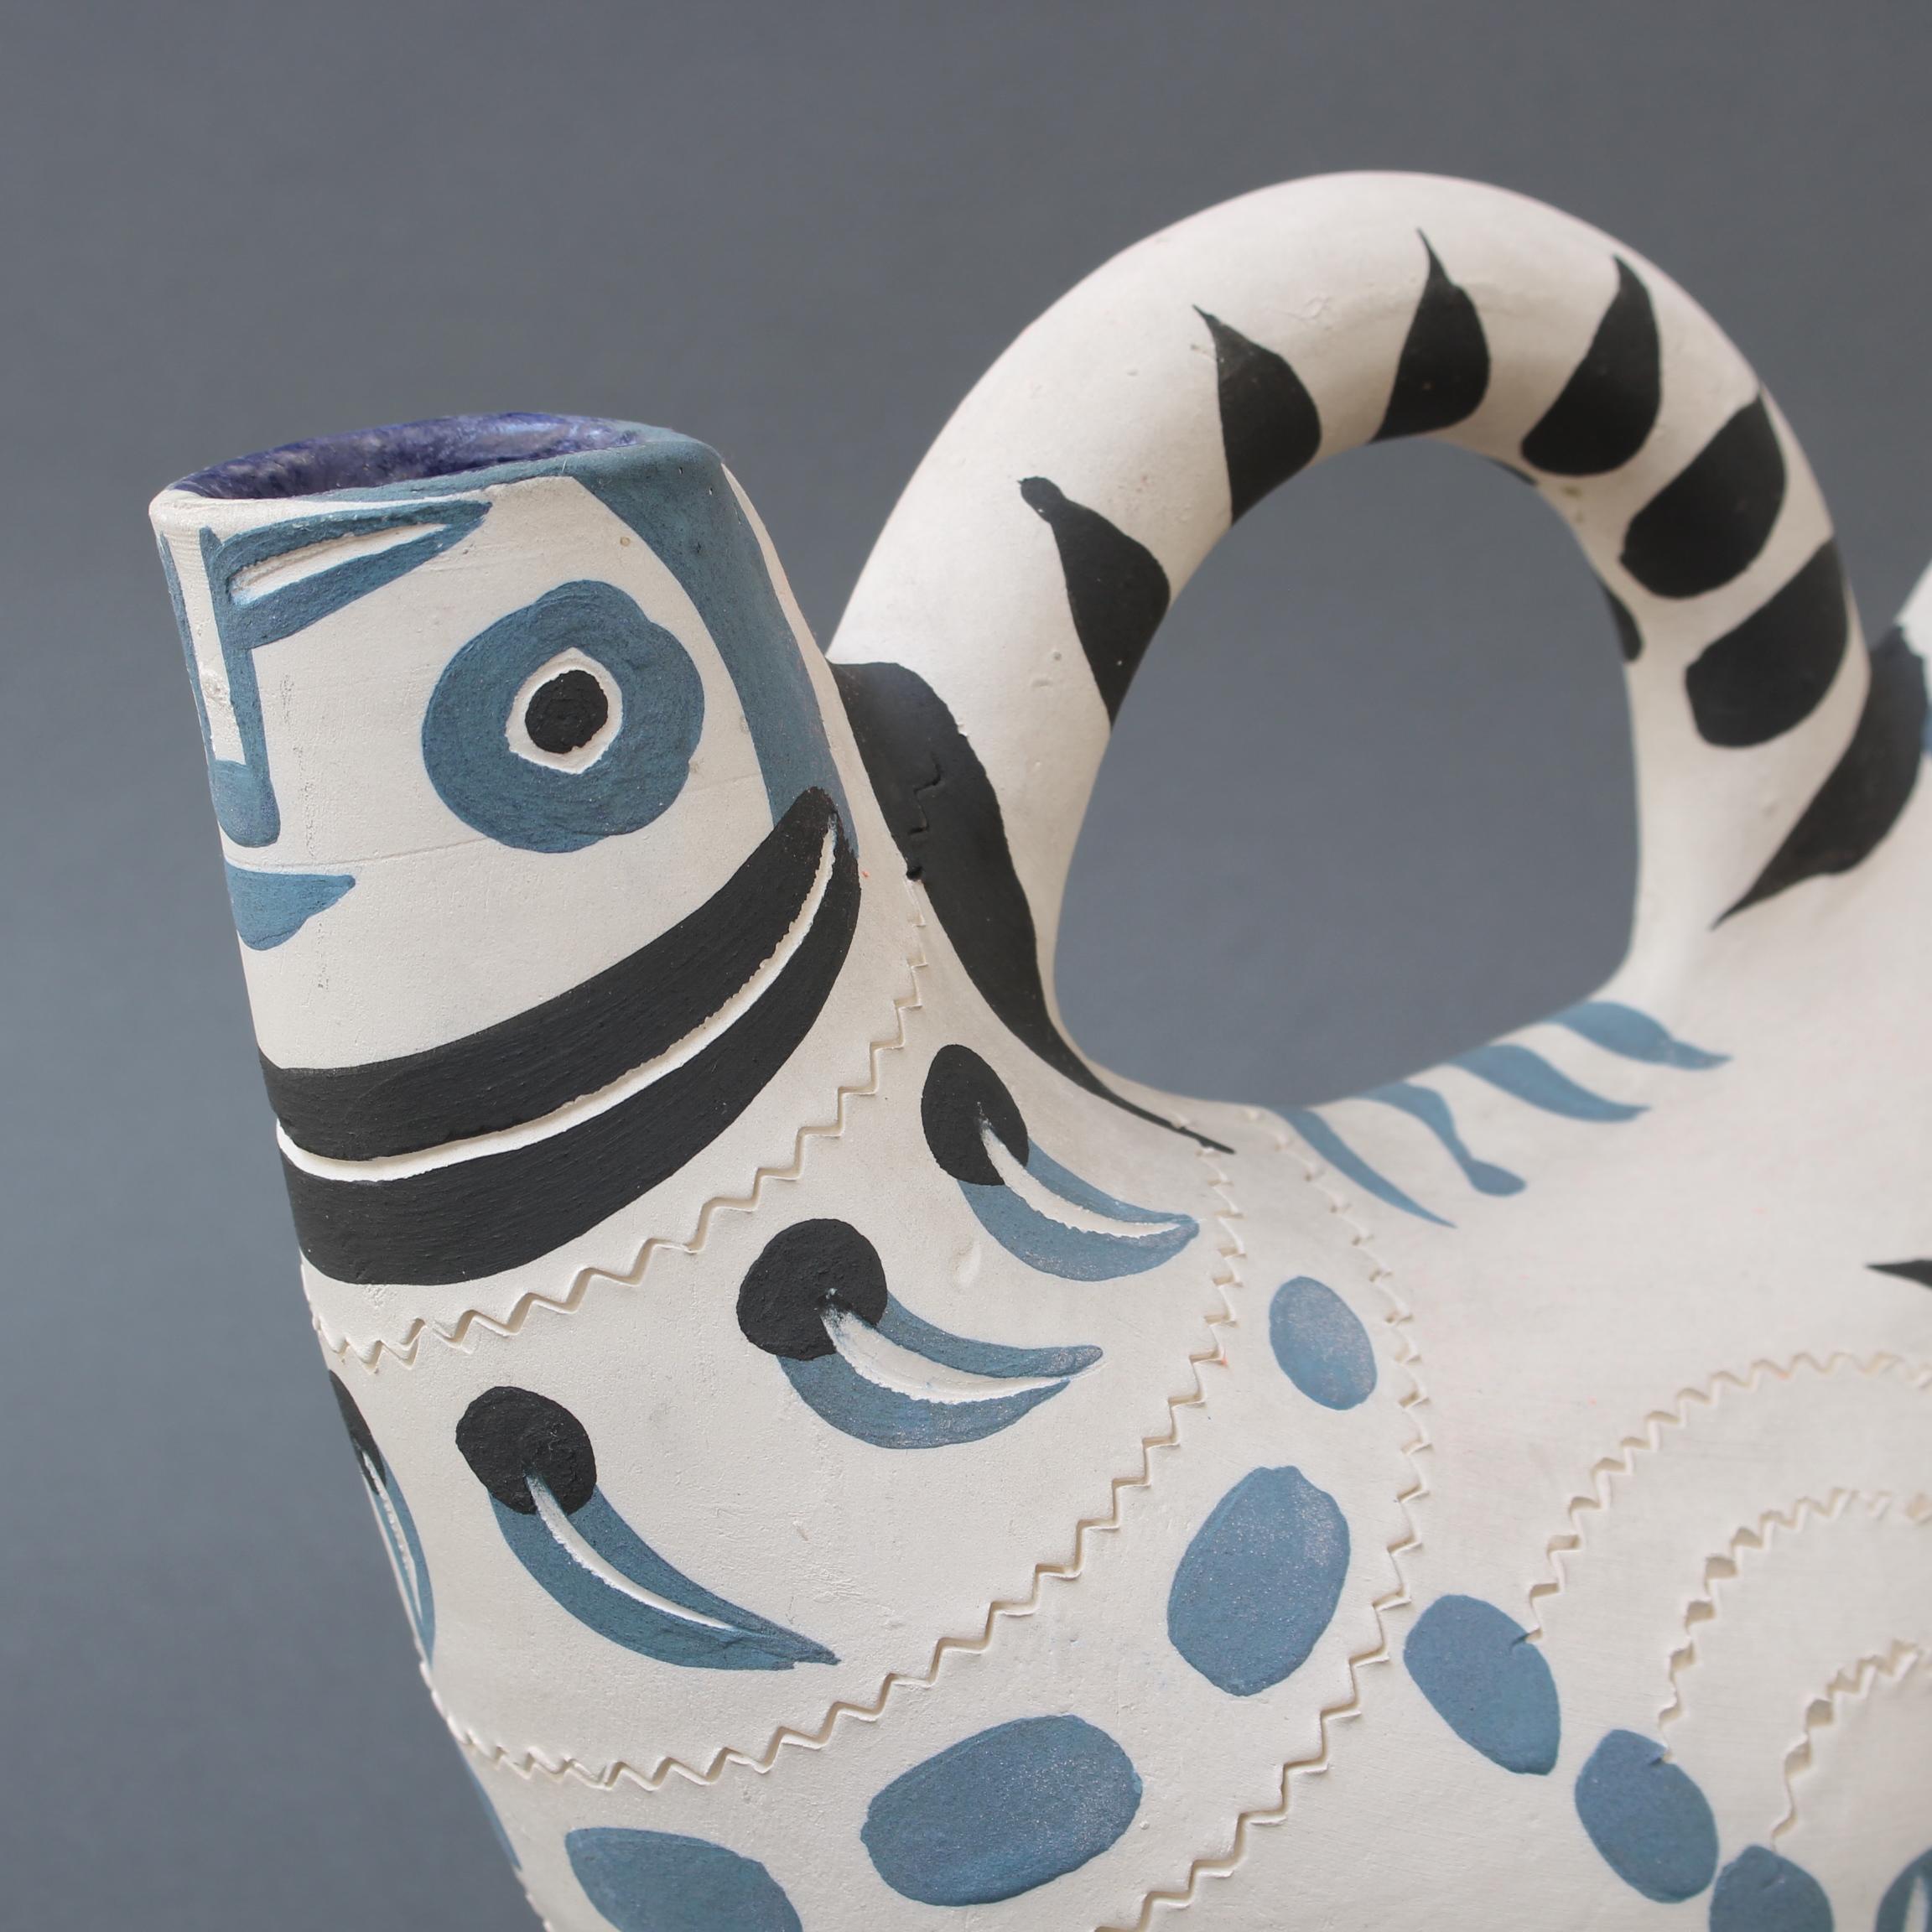 Mid-20th Century 'Pichet Espagnol' from the Madoura Pottery 'AR 245' by Pablo Picasso '1954' For Sale